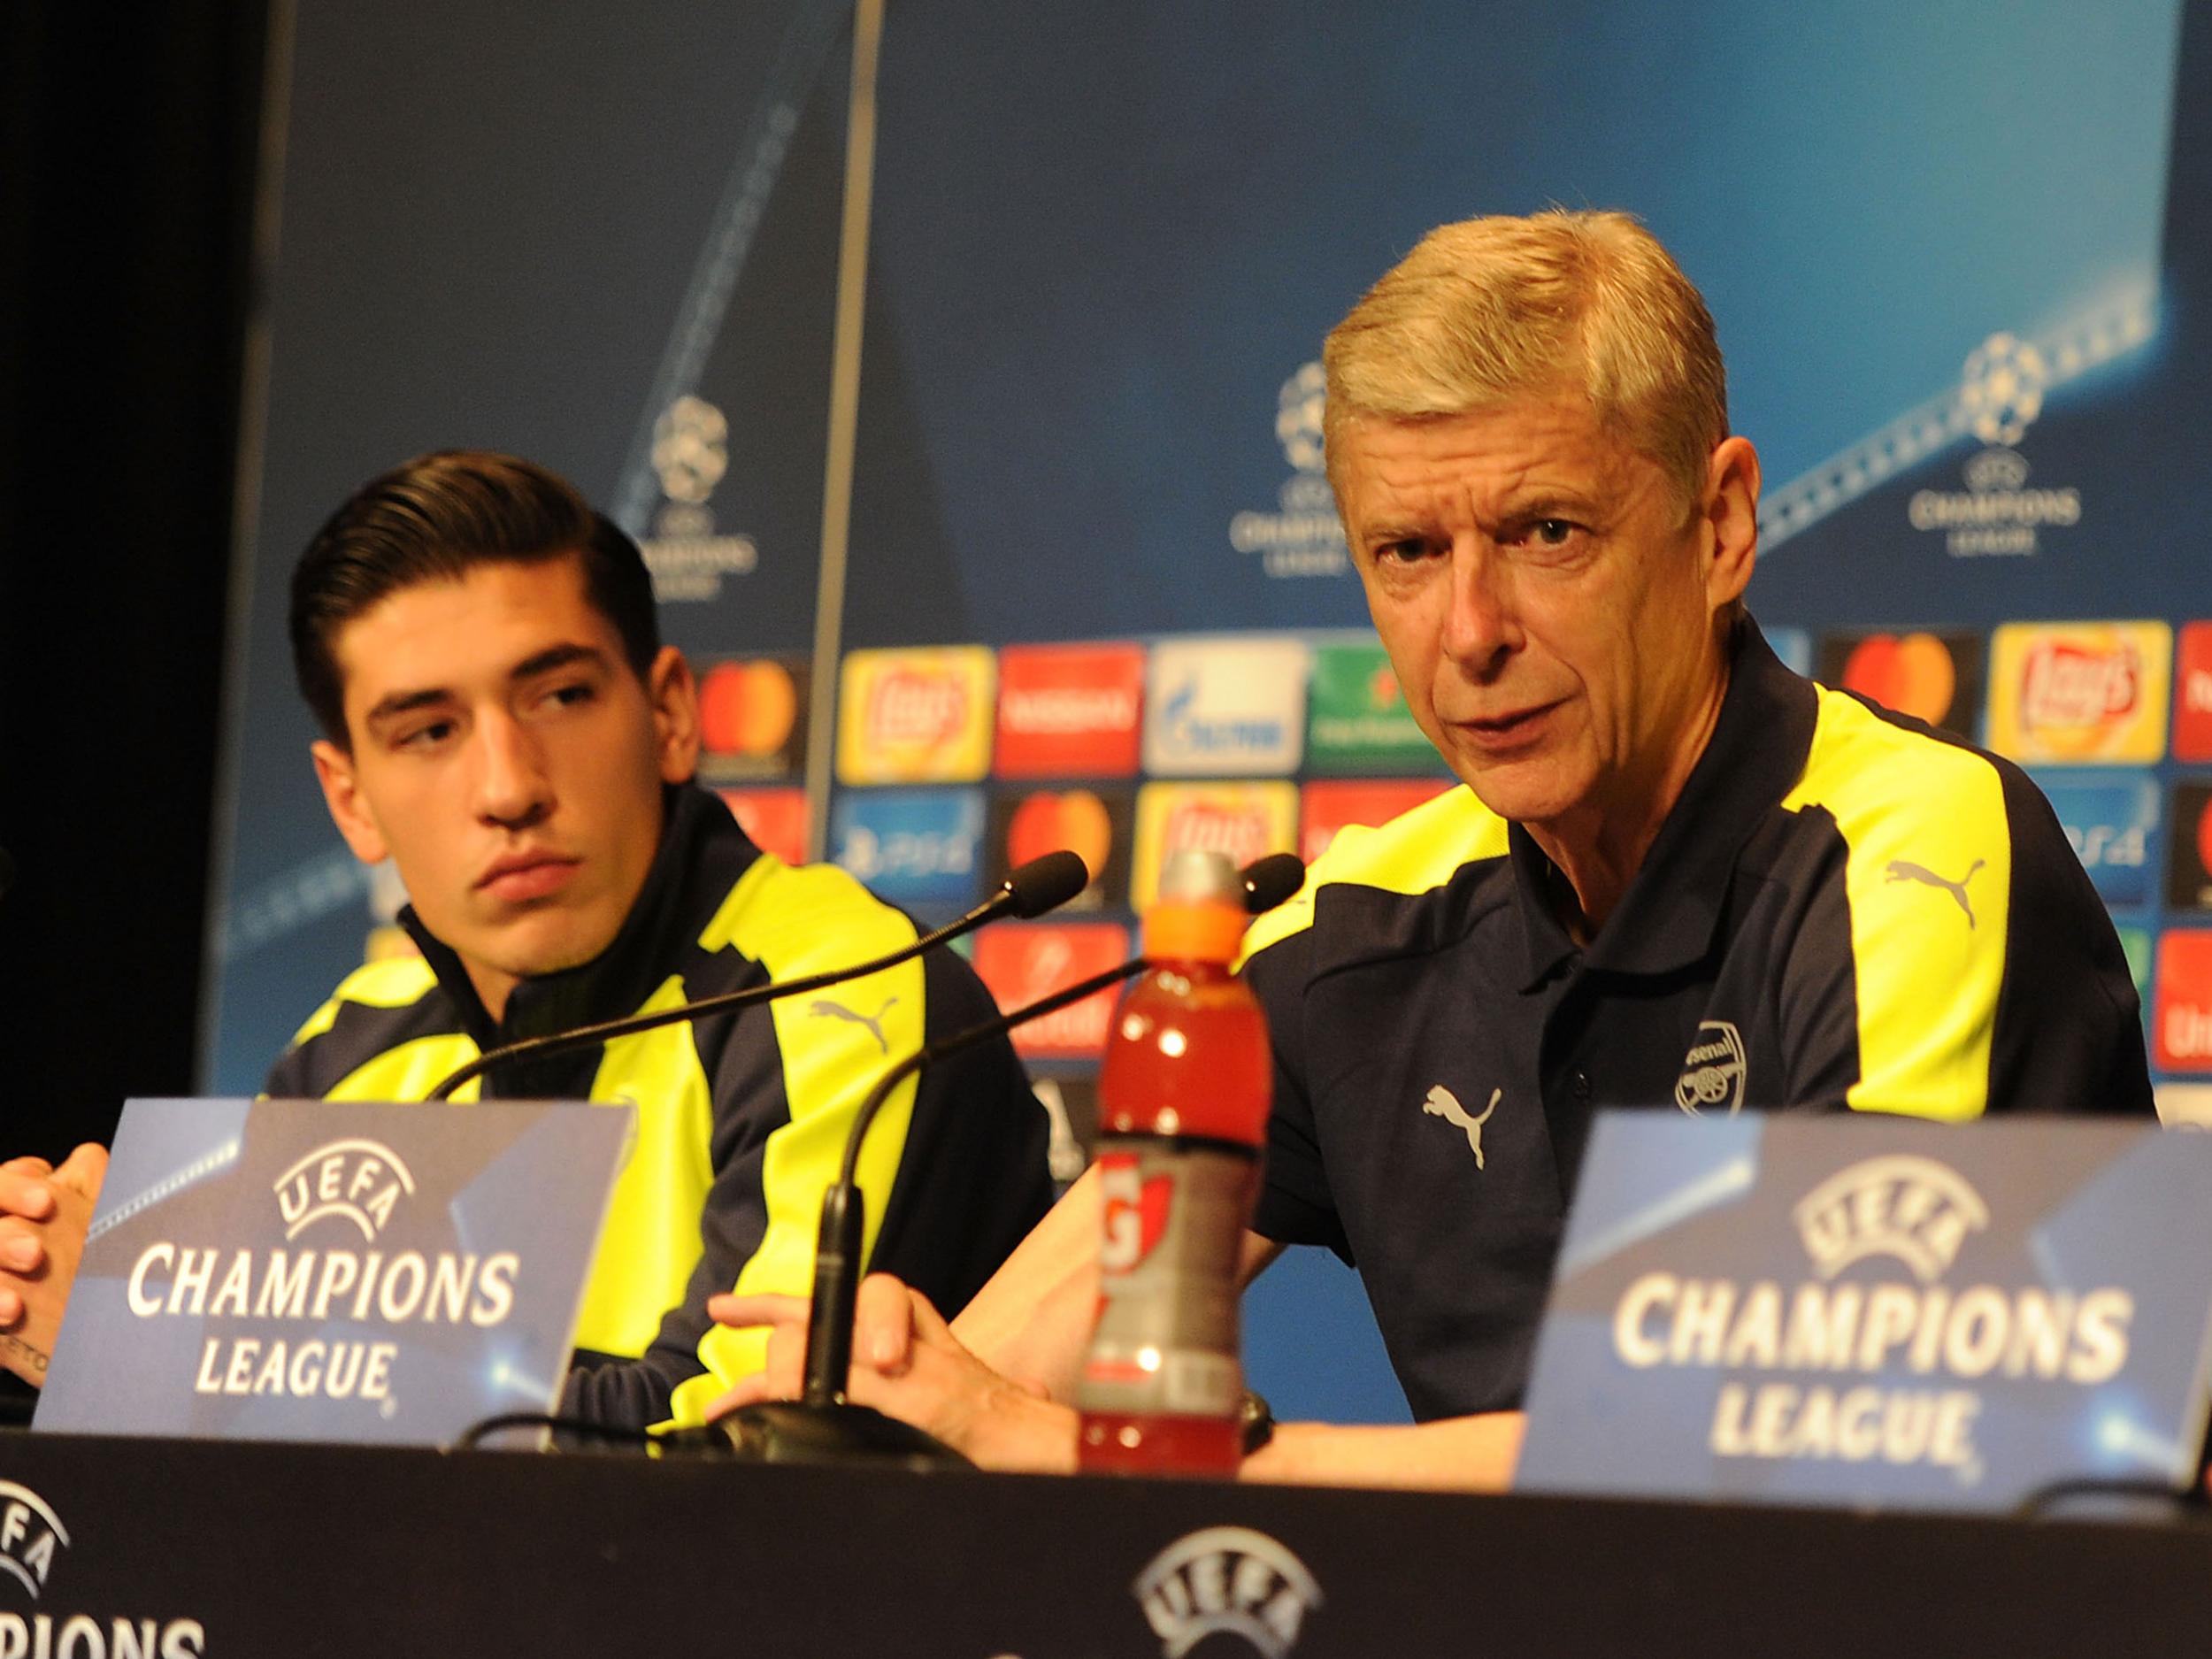 Bellerin admitted he is 'flattered' by Barcelona's interest in him